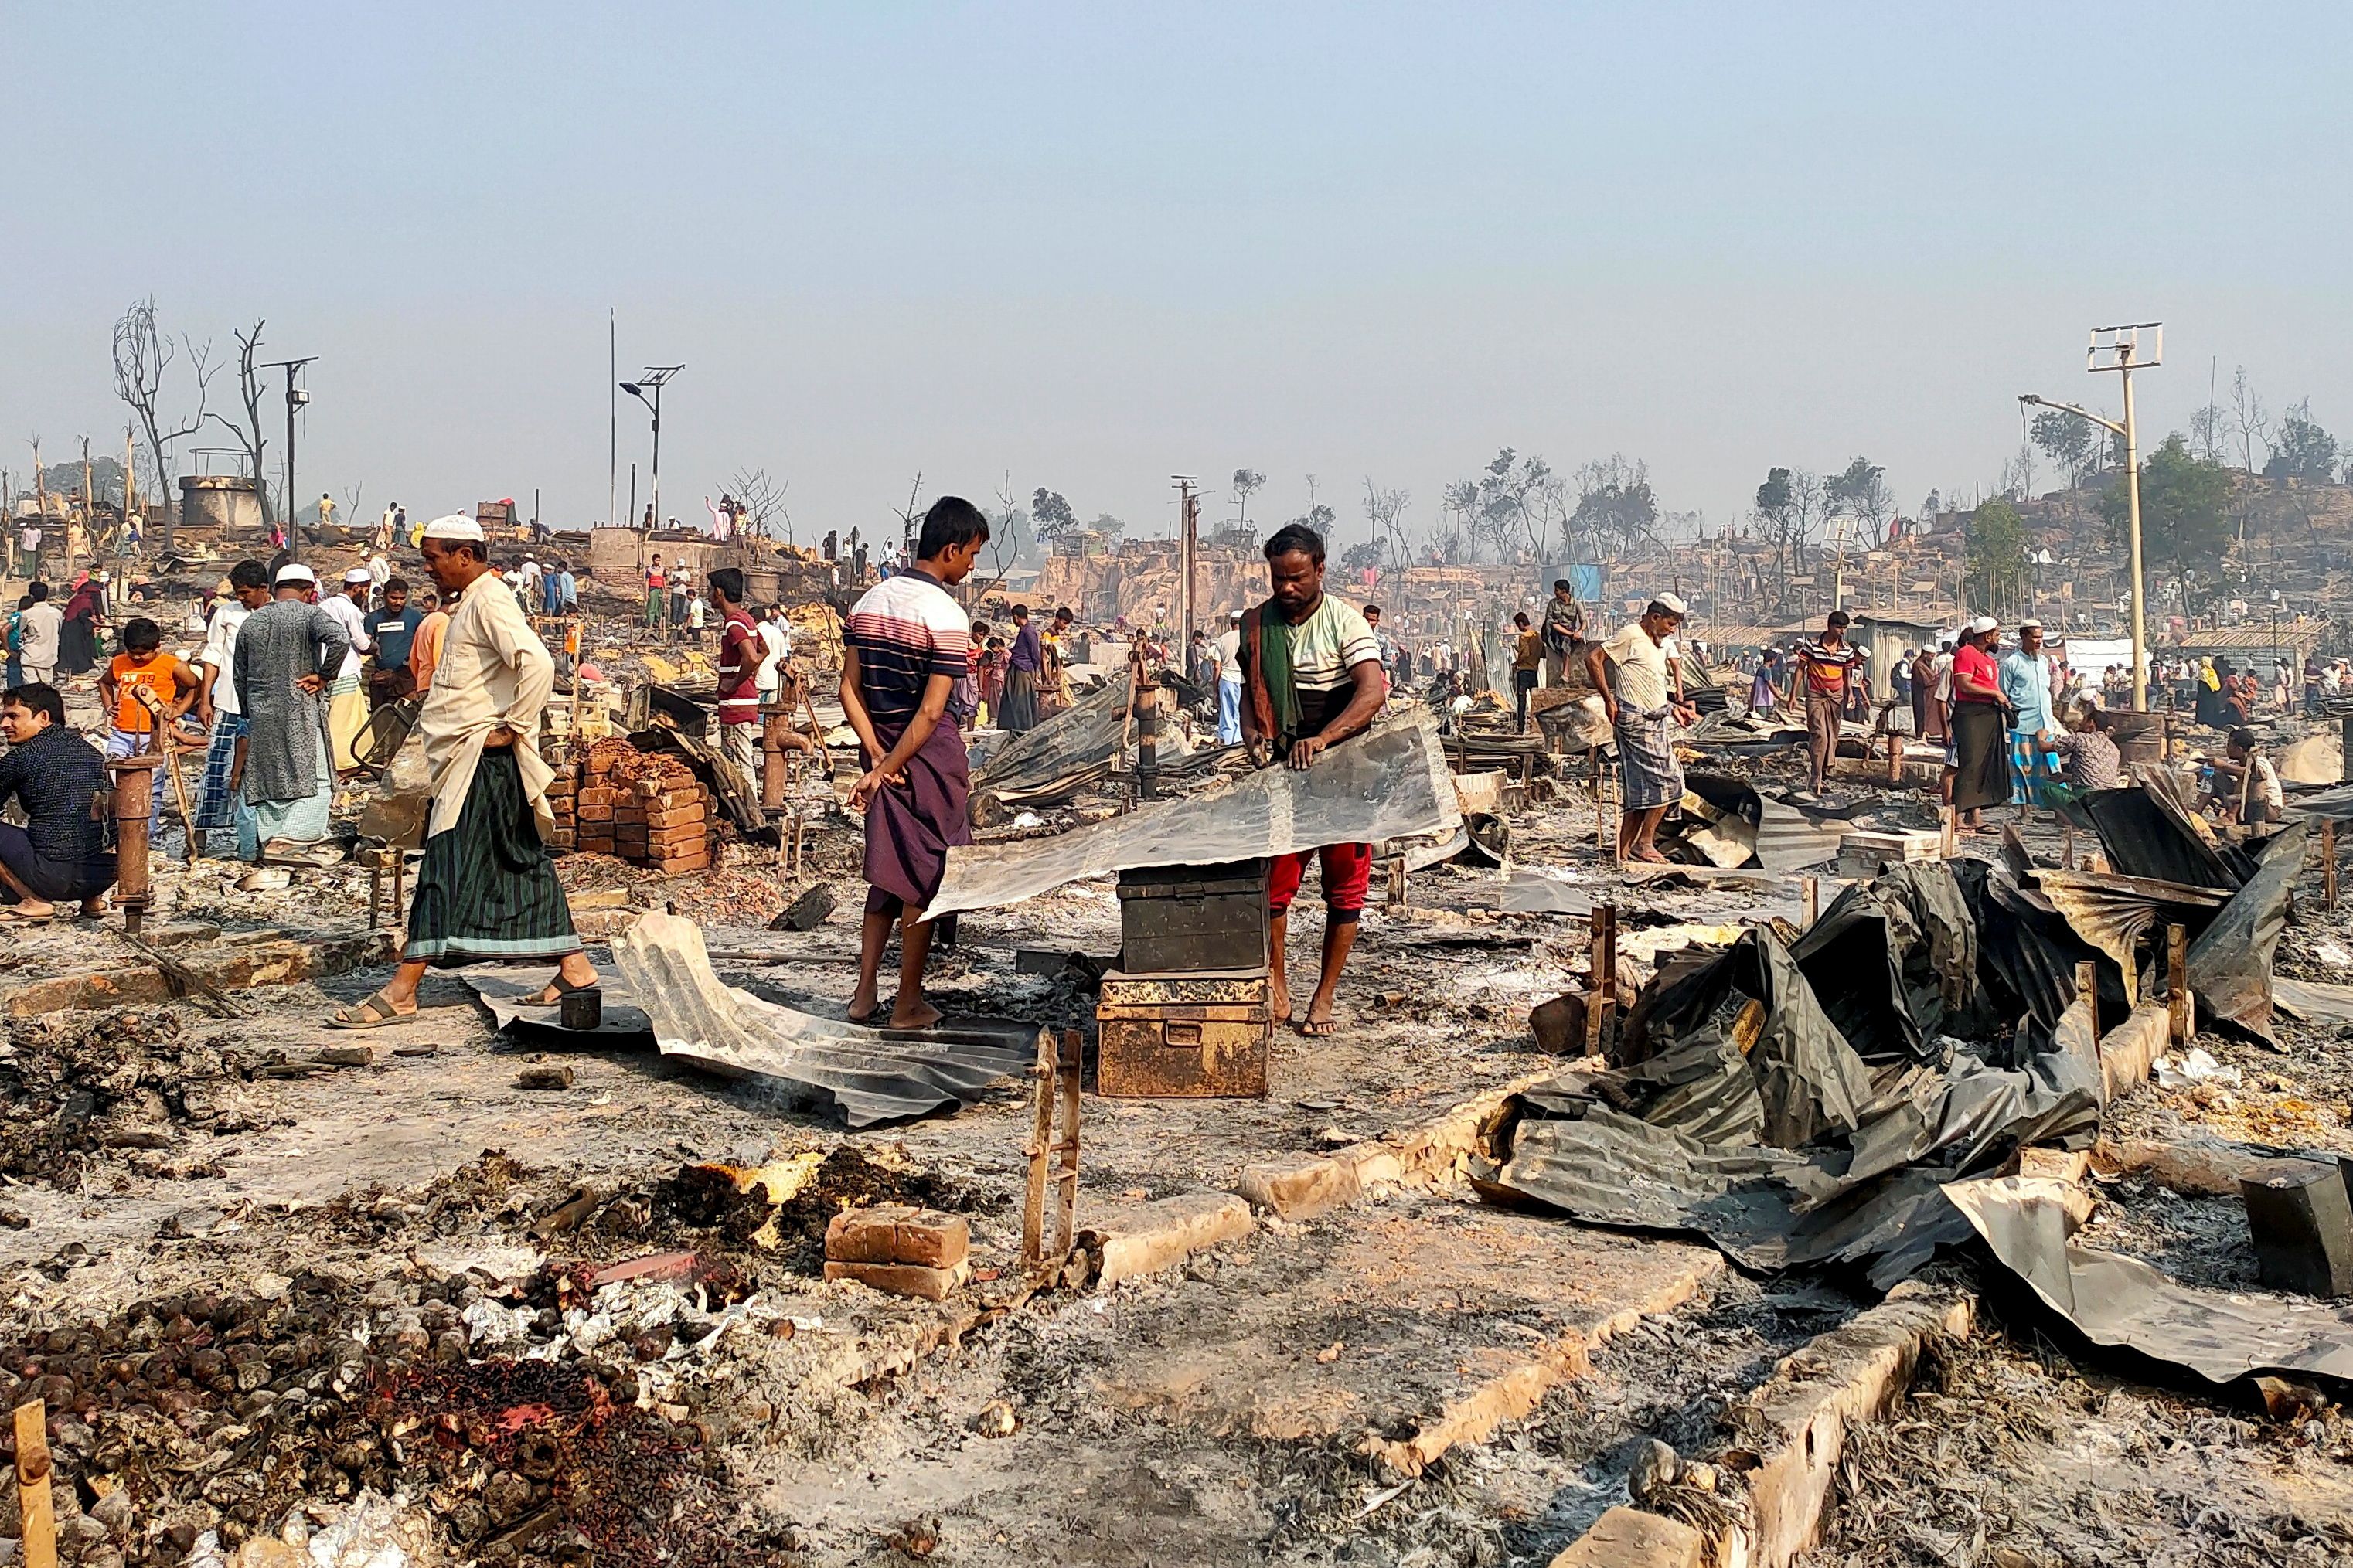 Rohingya refugees sift through rubble at the site where their shelter has been burned down following a fire that broke out at a Rohingya refugee camp in Cox's Bazar, Bangladesh, March 23, 2021. REUTERS/Ro Yassin Abdumonab 